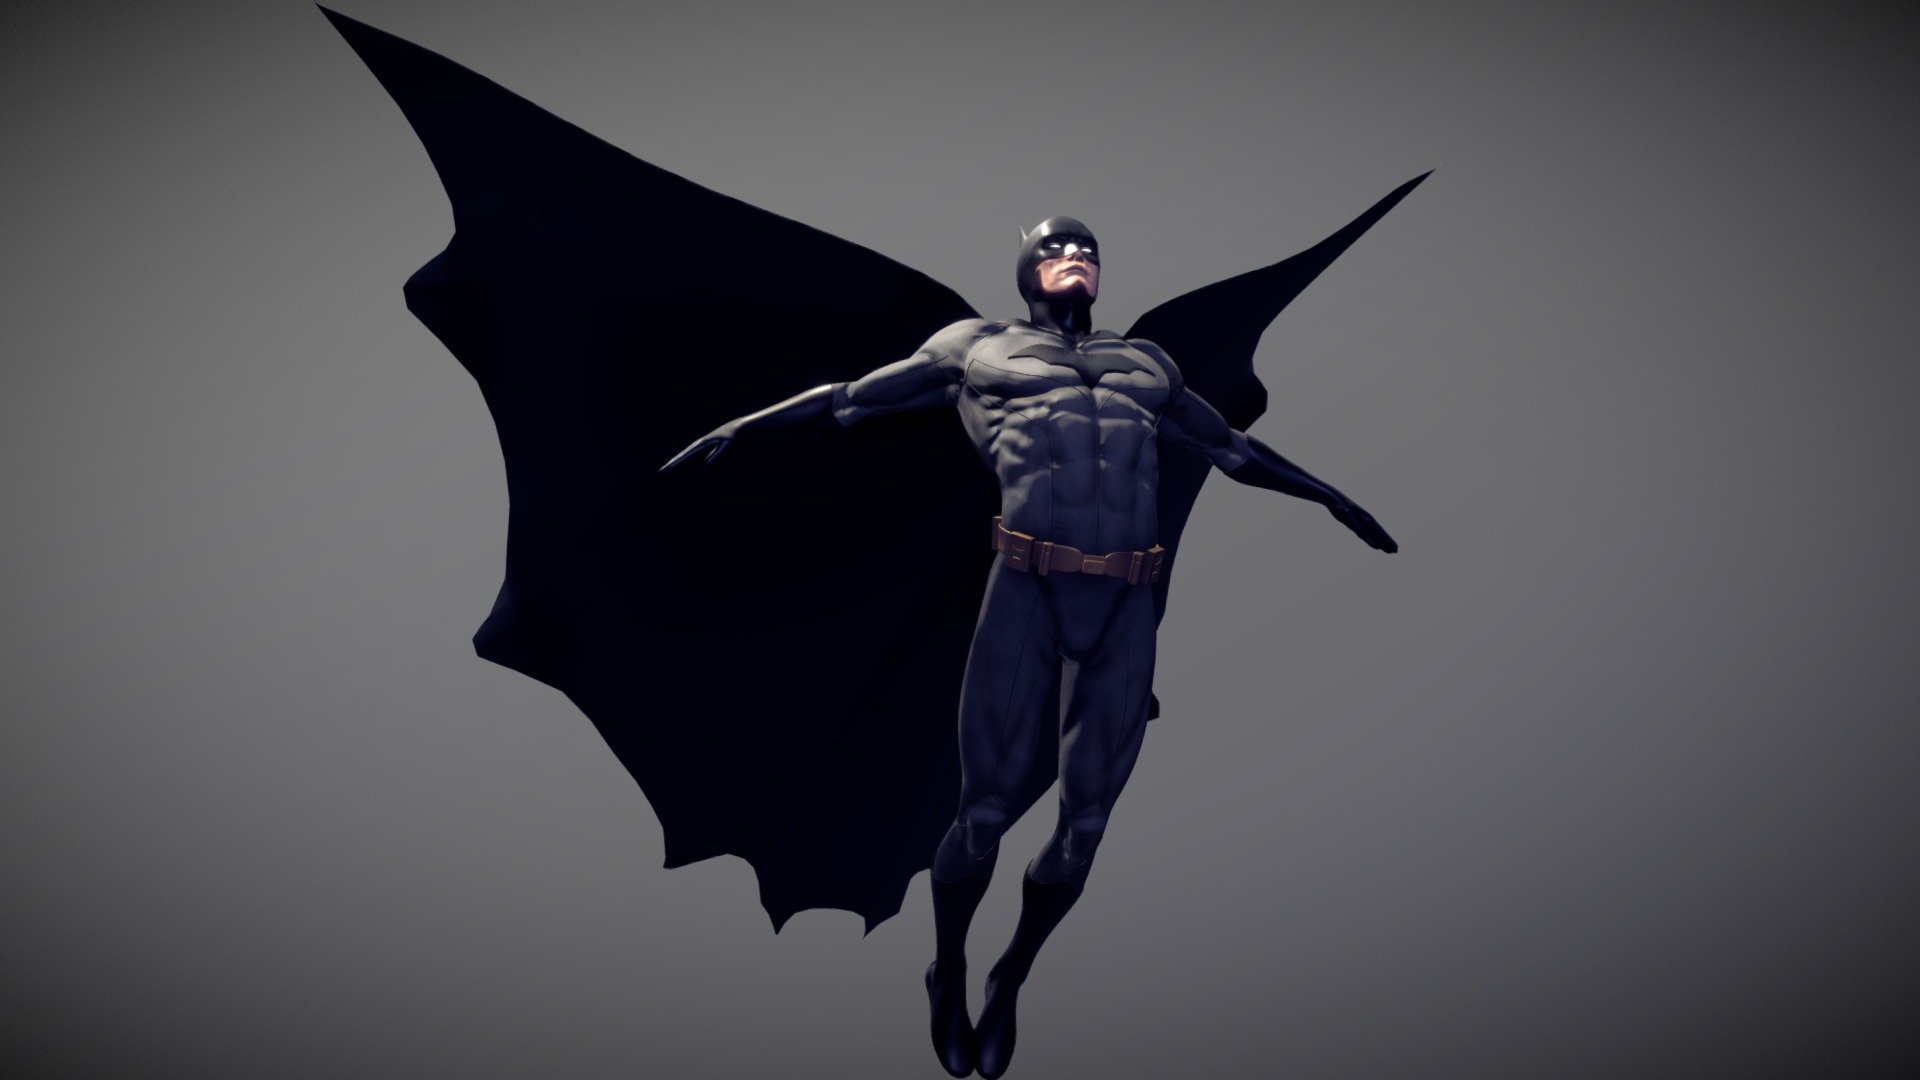 Full Project view: https://www.artstation.com/artwork/qAw1rD

My rendition of batman. Sculpt, retopology, rigging and main texturing all done inside Blender 2.8 with some Photoshop assistance for the textures. All textures baked inside the blender 2.8 3d model